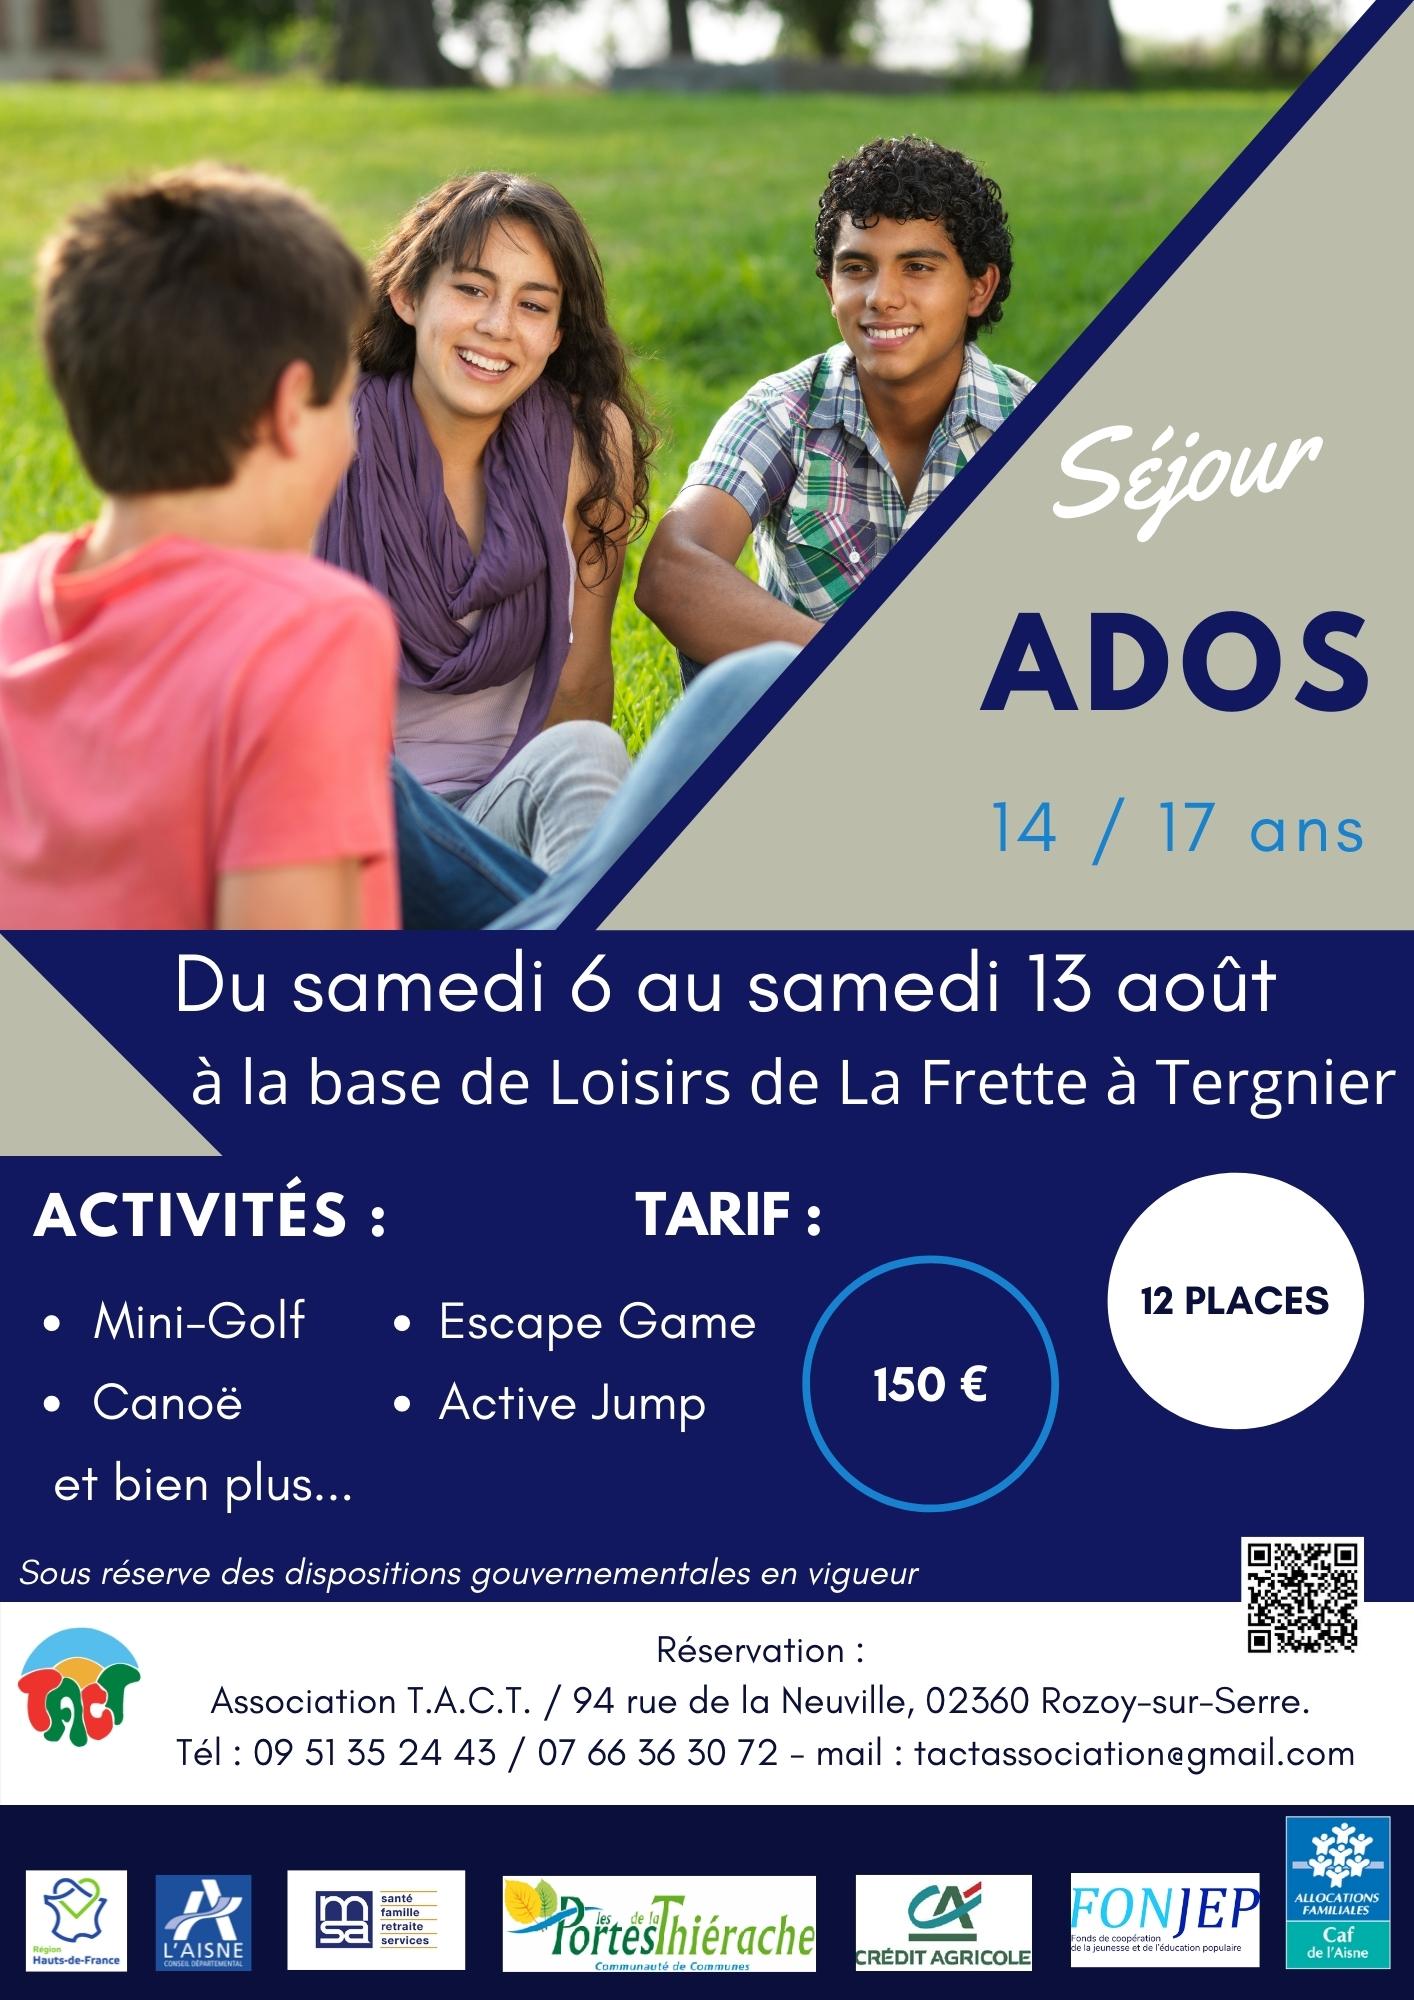 You are currently viewing Séjour Ados 14 / 17 ans